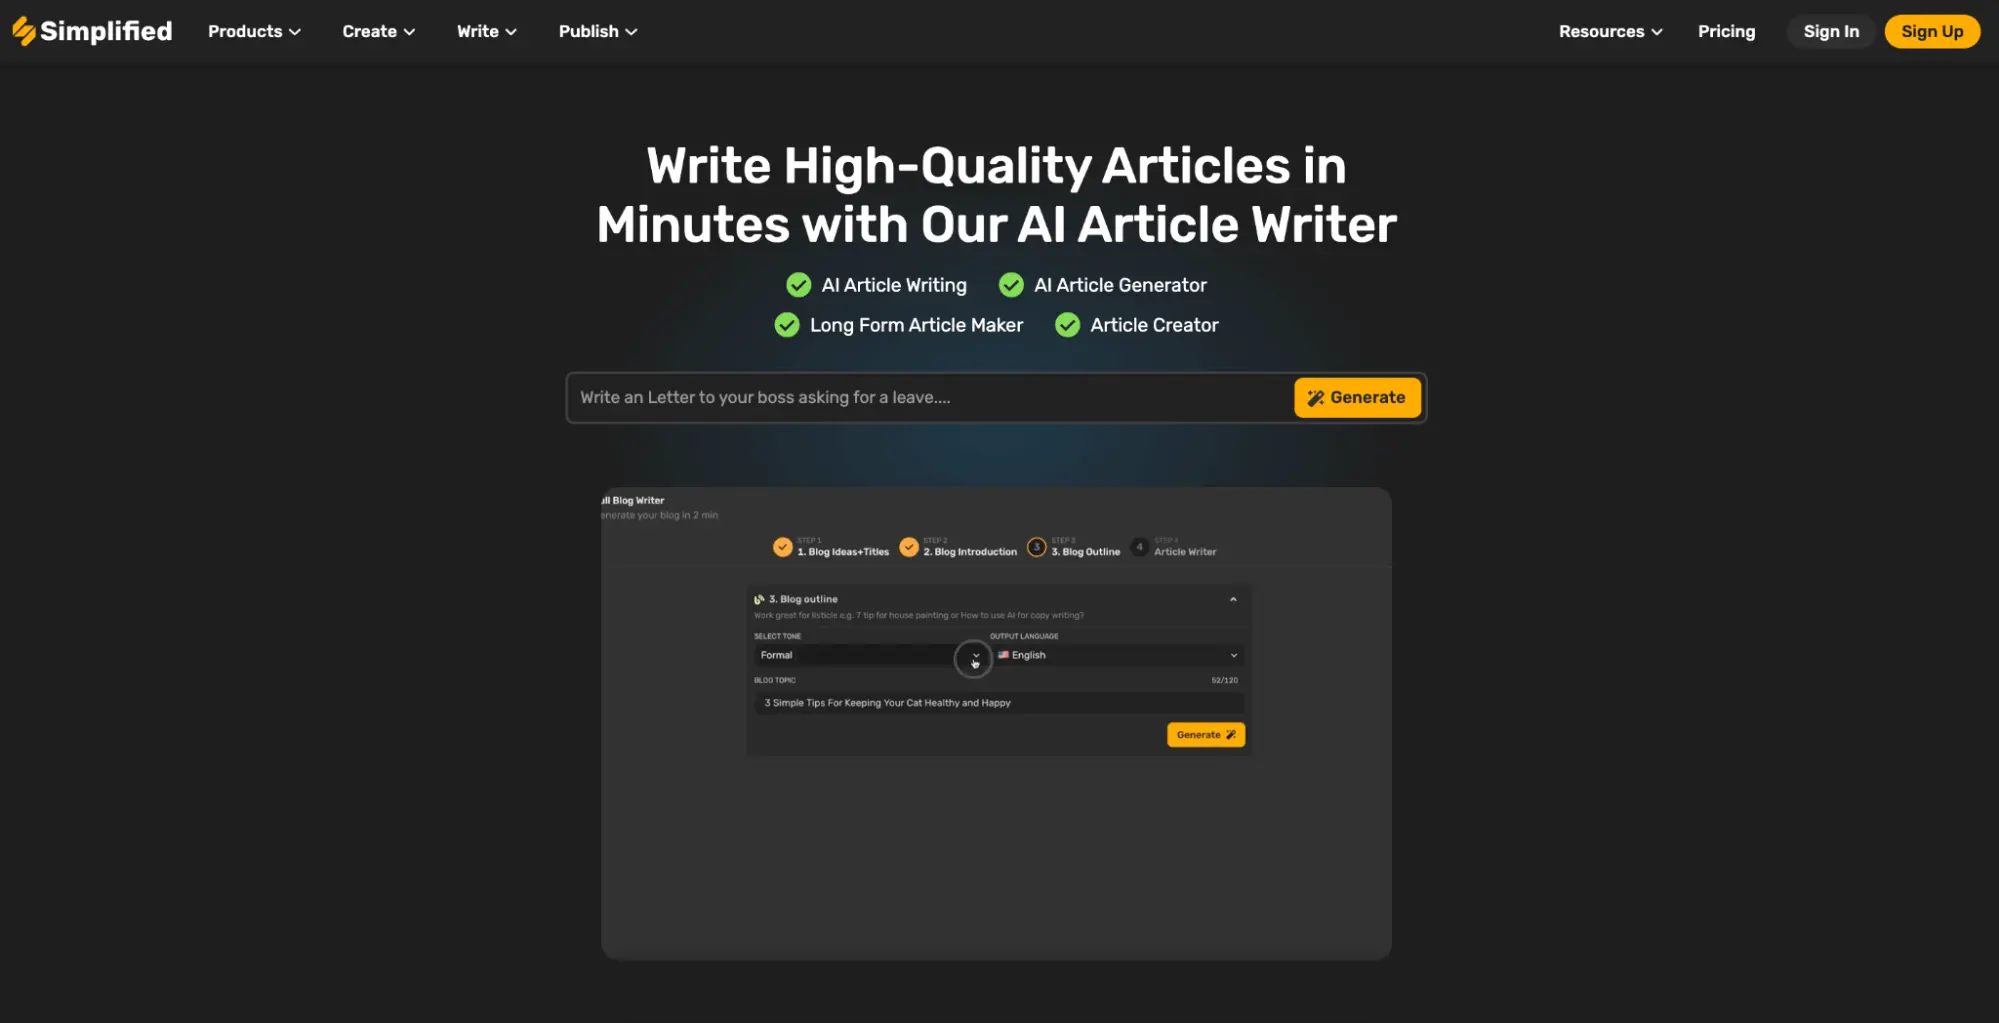 Simplified’s article writer